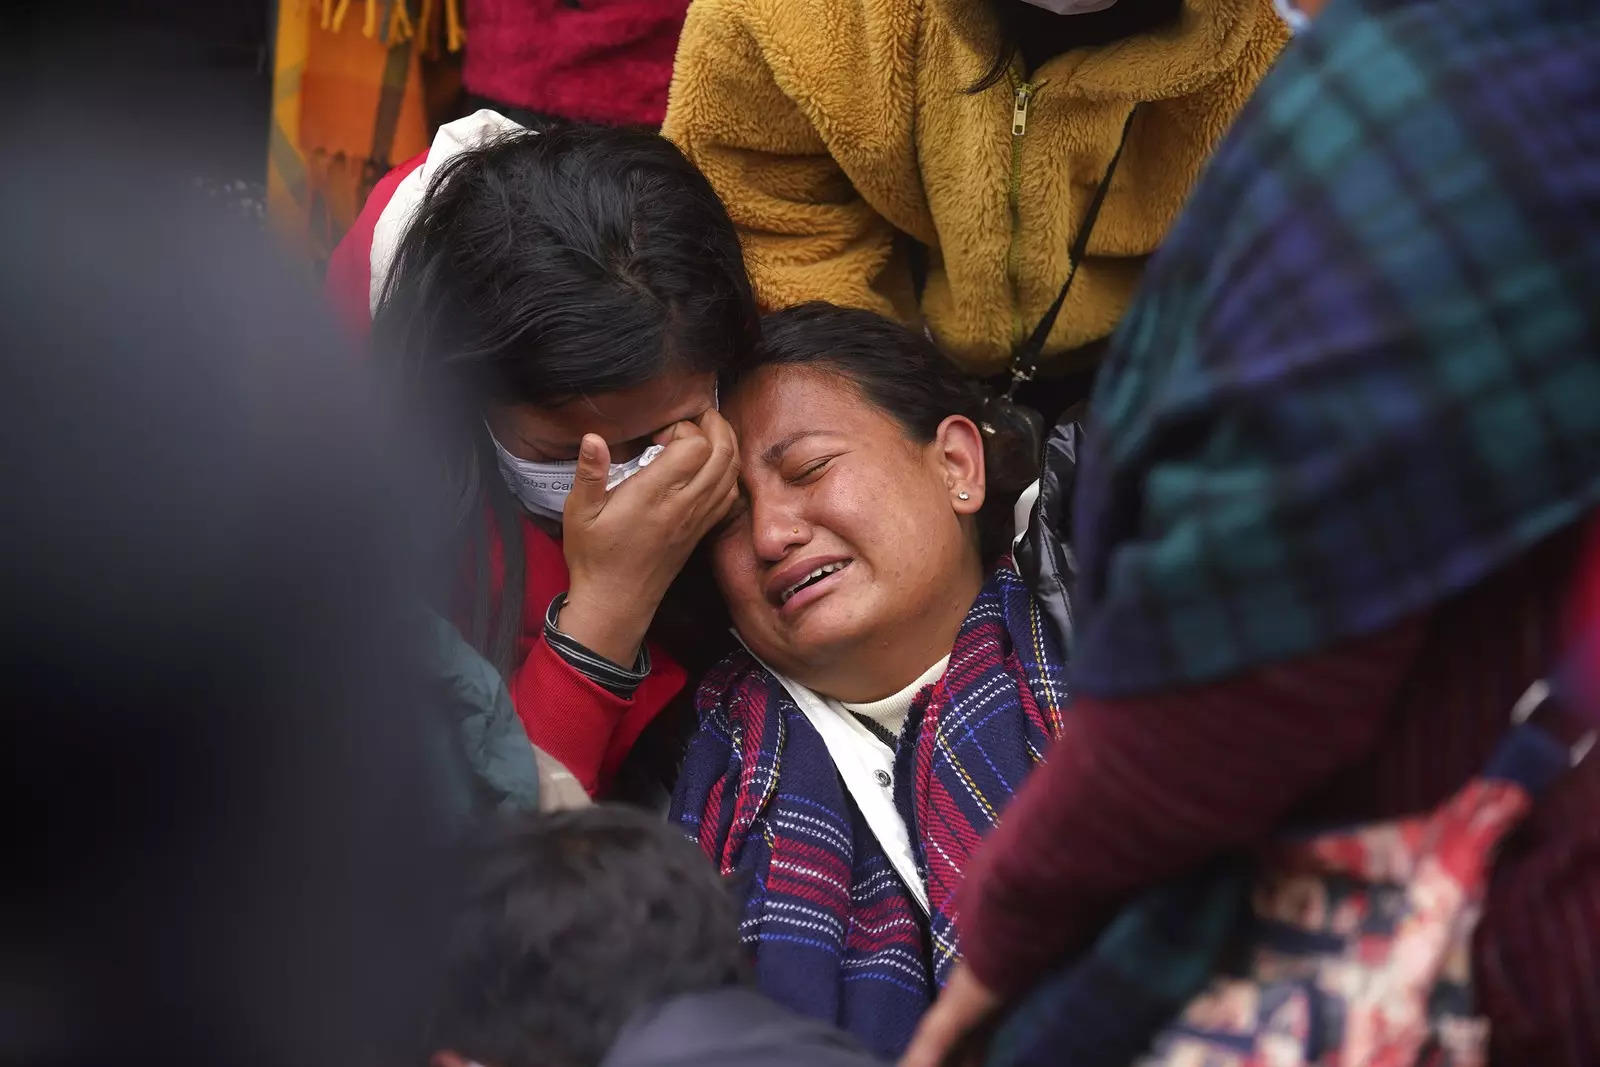 Nepal mourns after plane crash kills at least 68